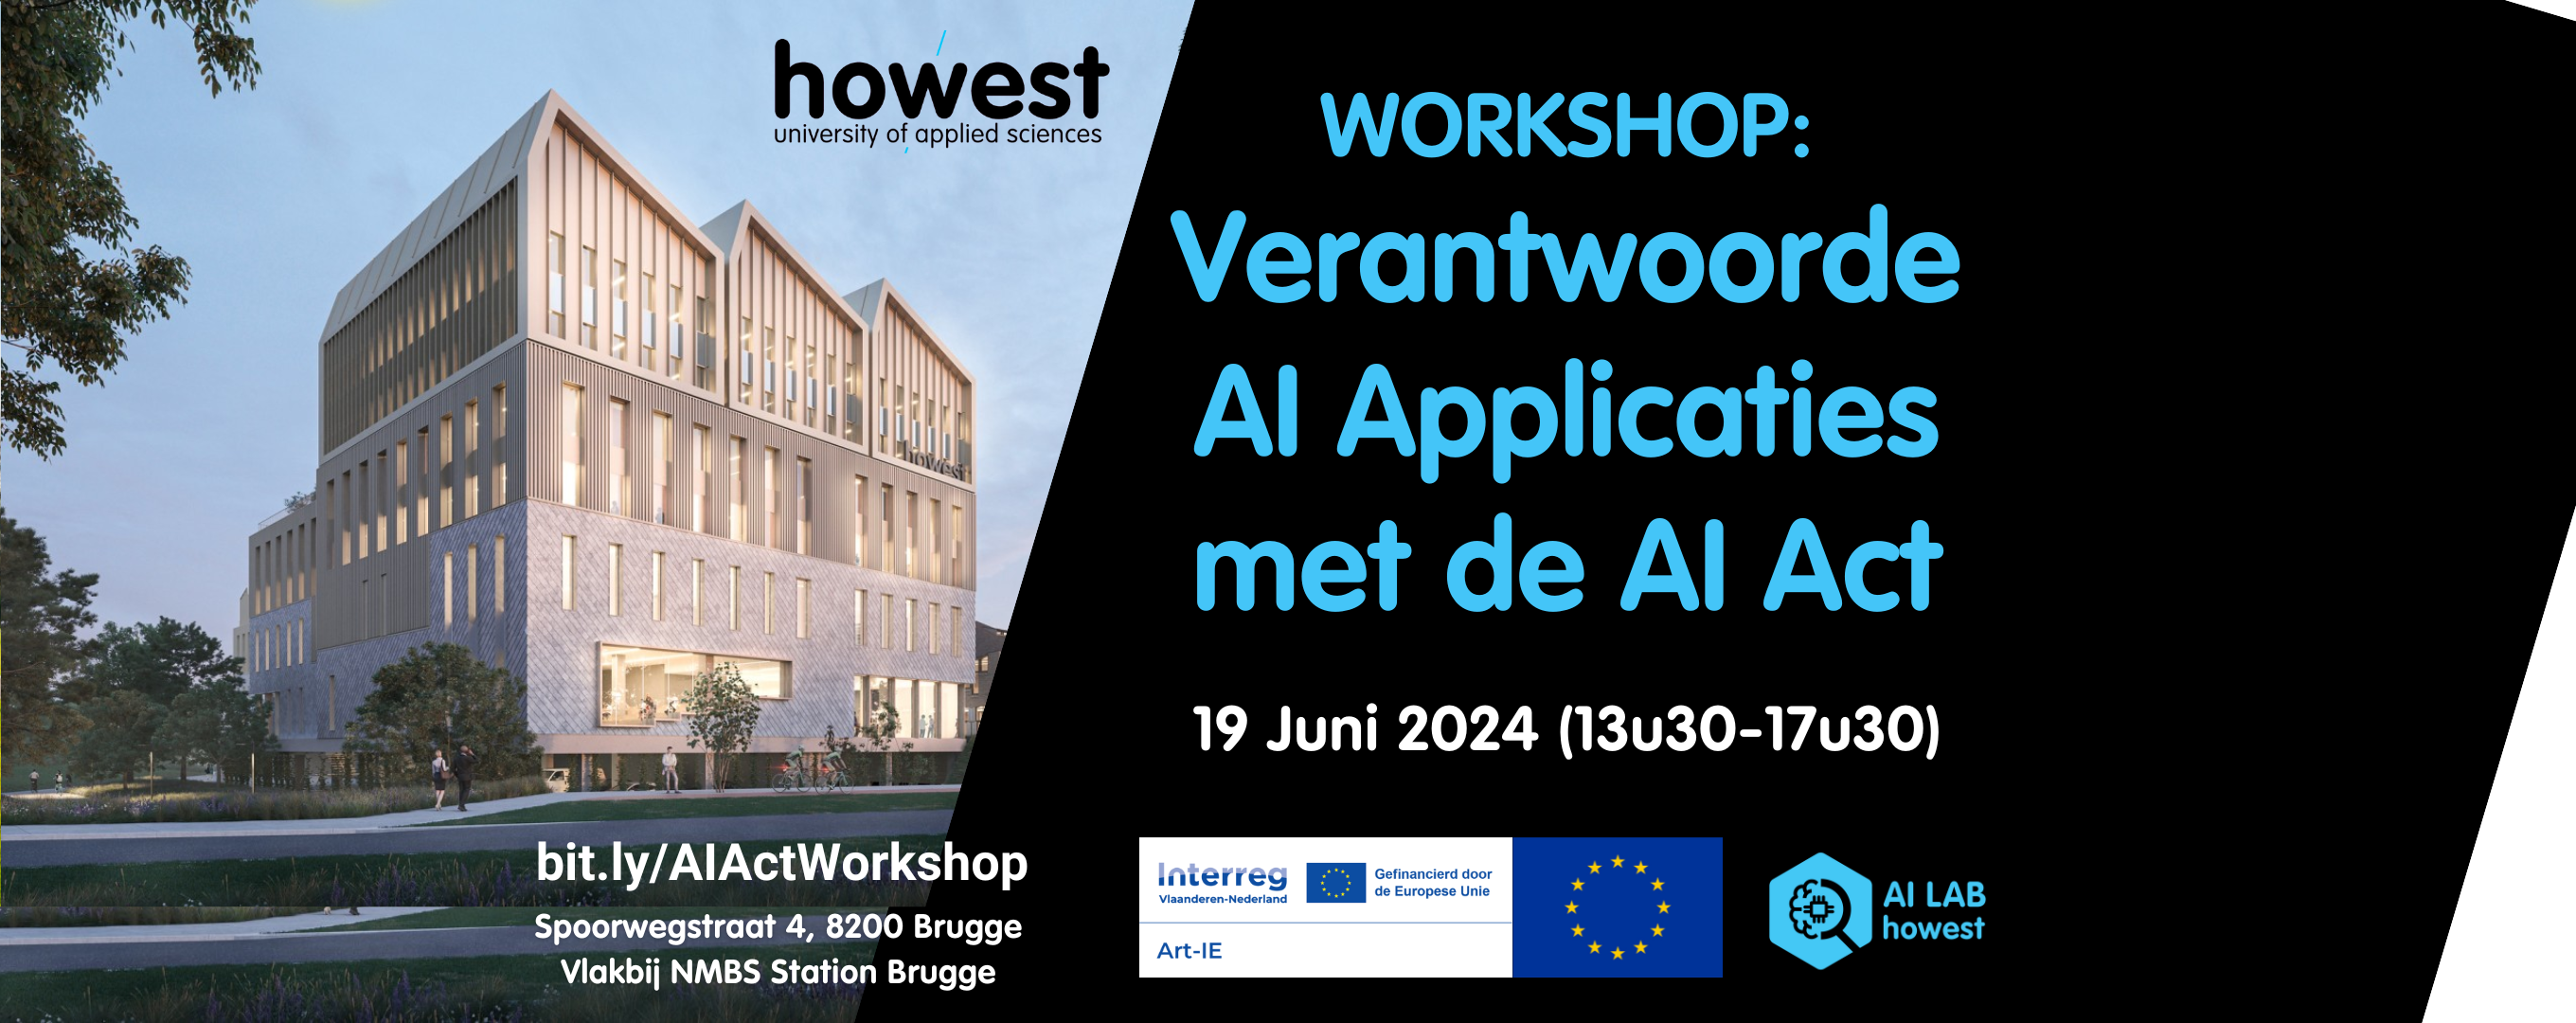 19/06/'24 - Themadag Applied AI, Howest, Brugge